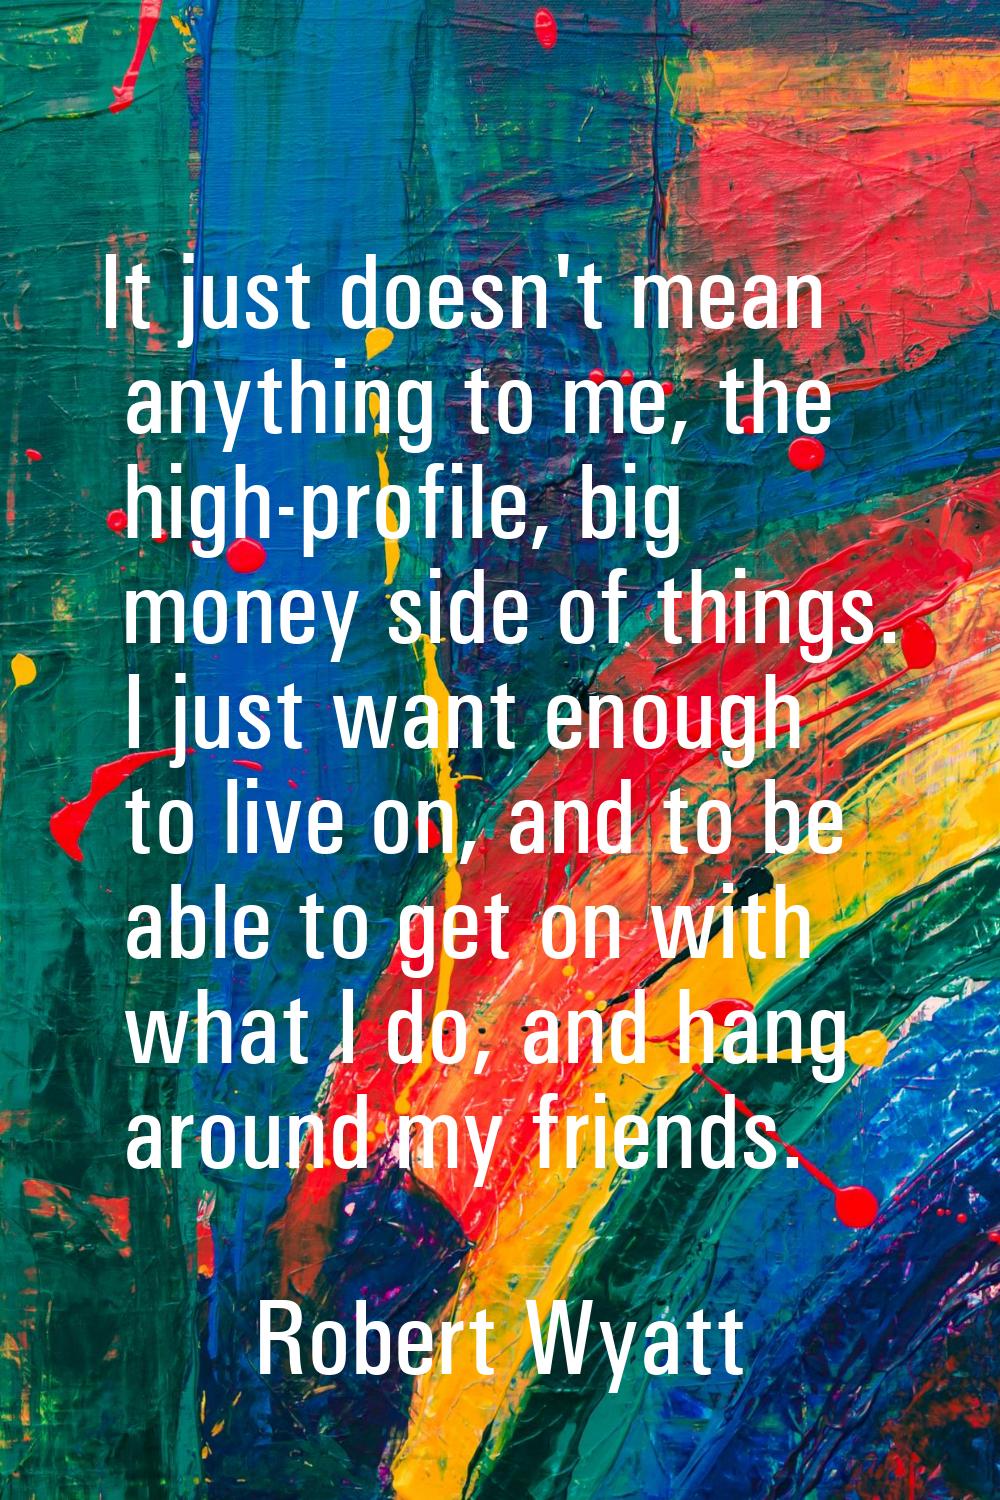 It just doesn't mean anything to me, the high-profile, big money side of things. I just want enough